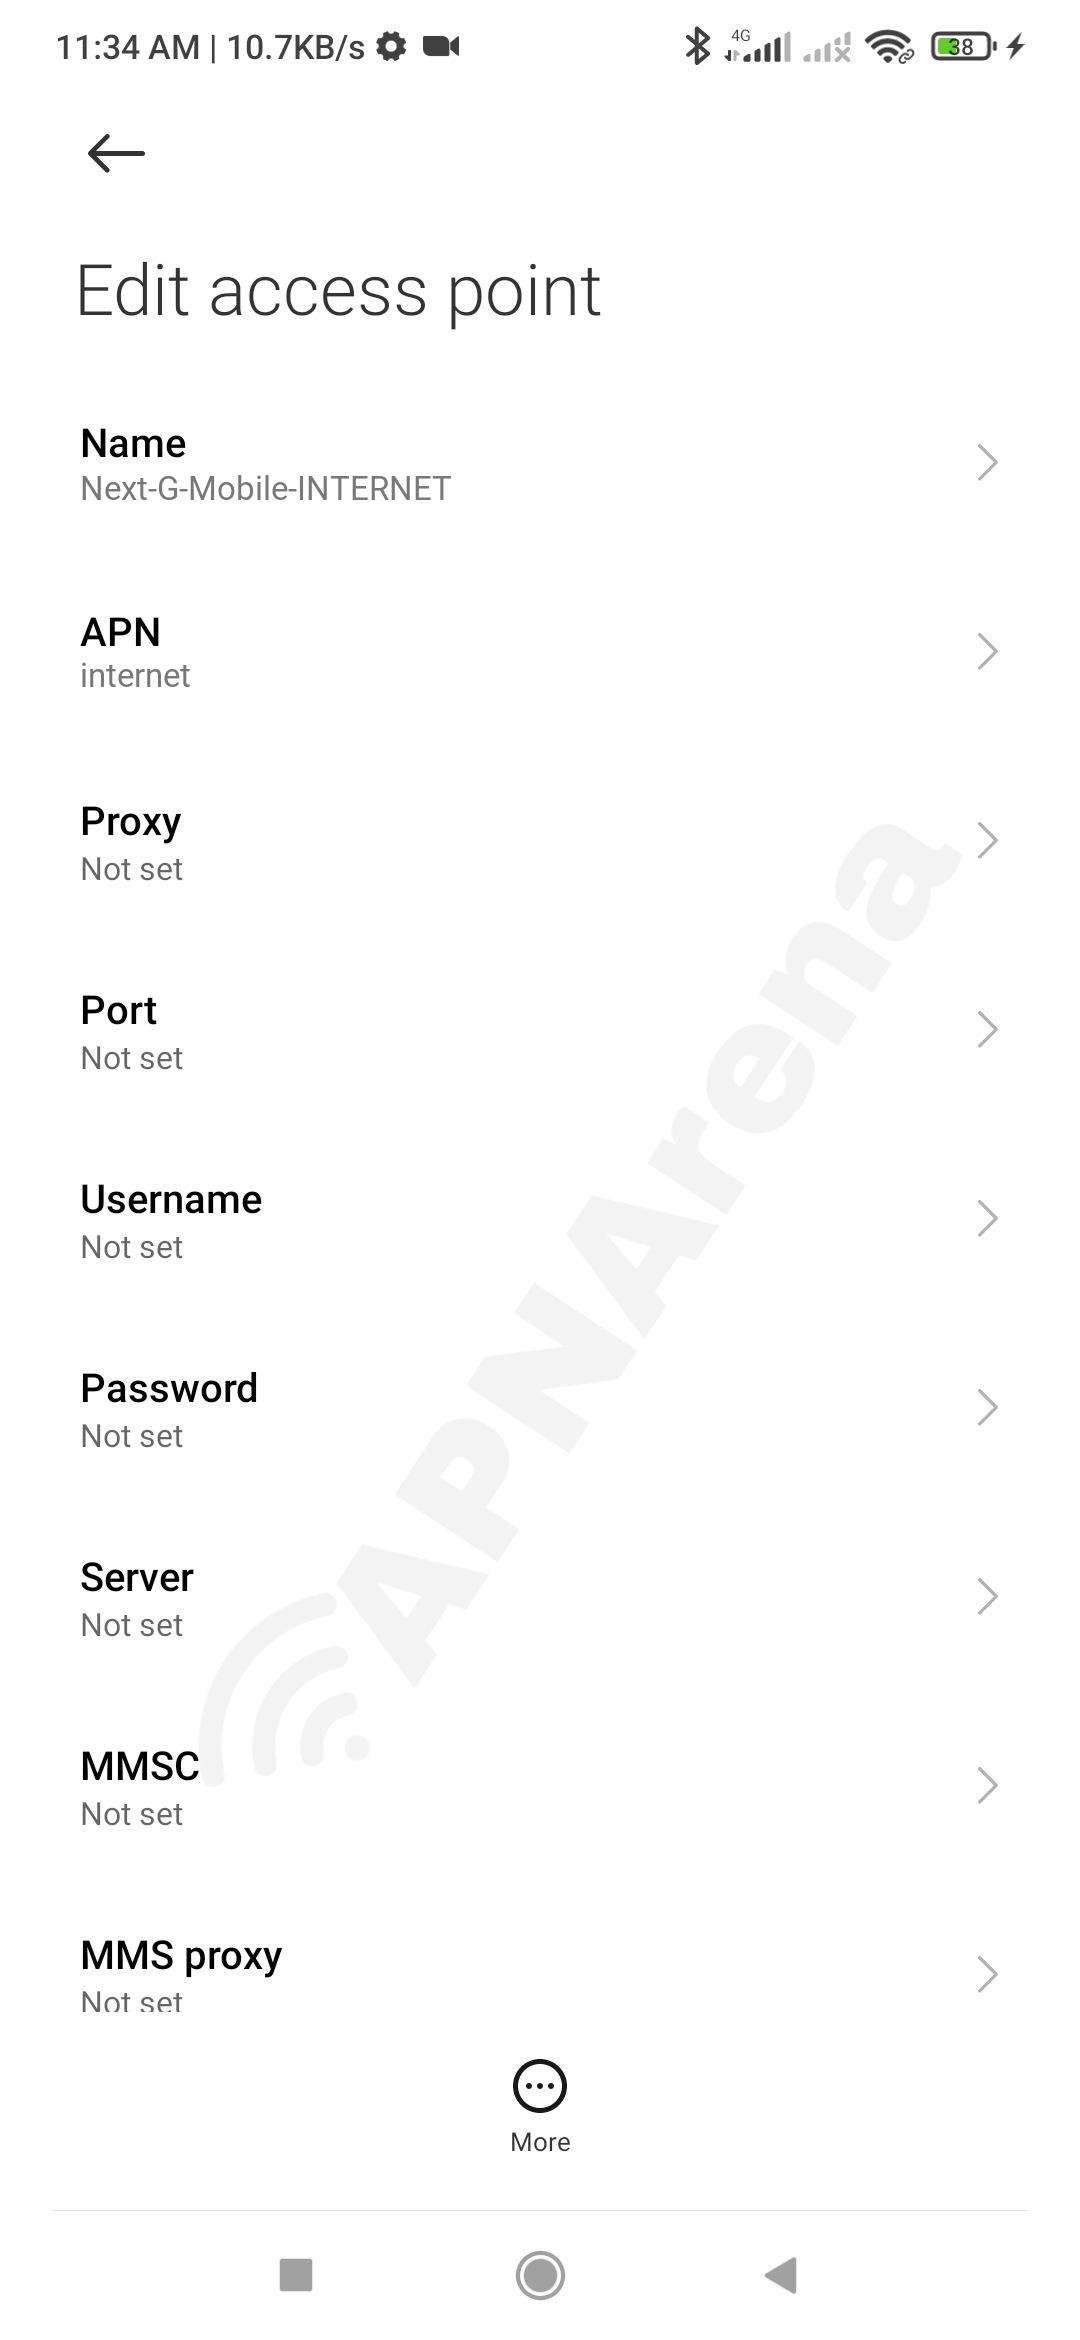 Next G Mobile APN Settings for Android